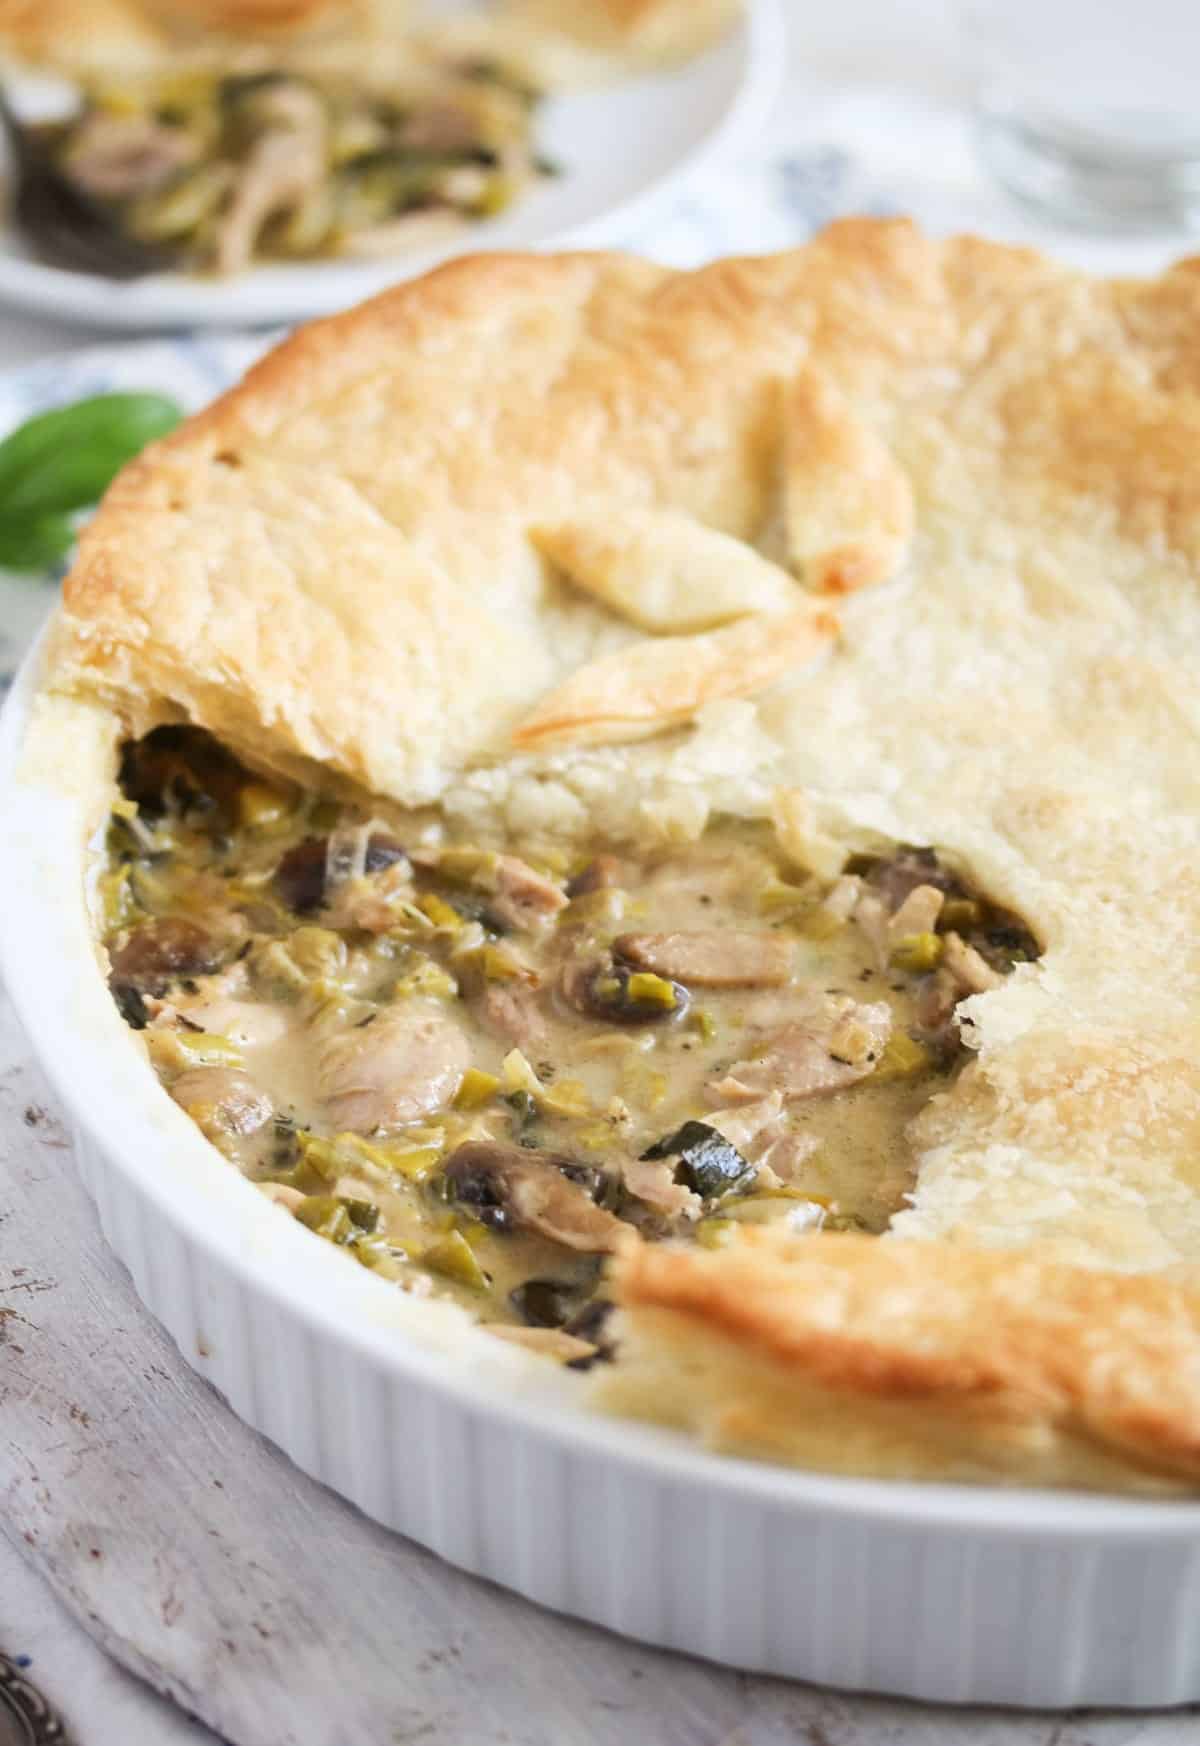 chicken pie with leeks and mushrooms in a ceramic dish with a piece of pastry missing on top.